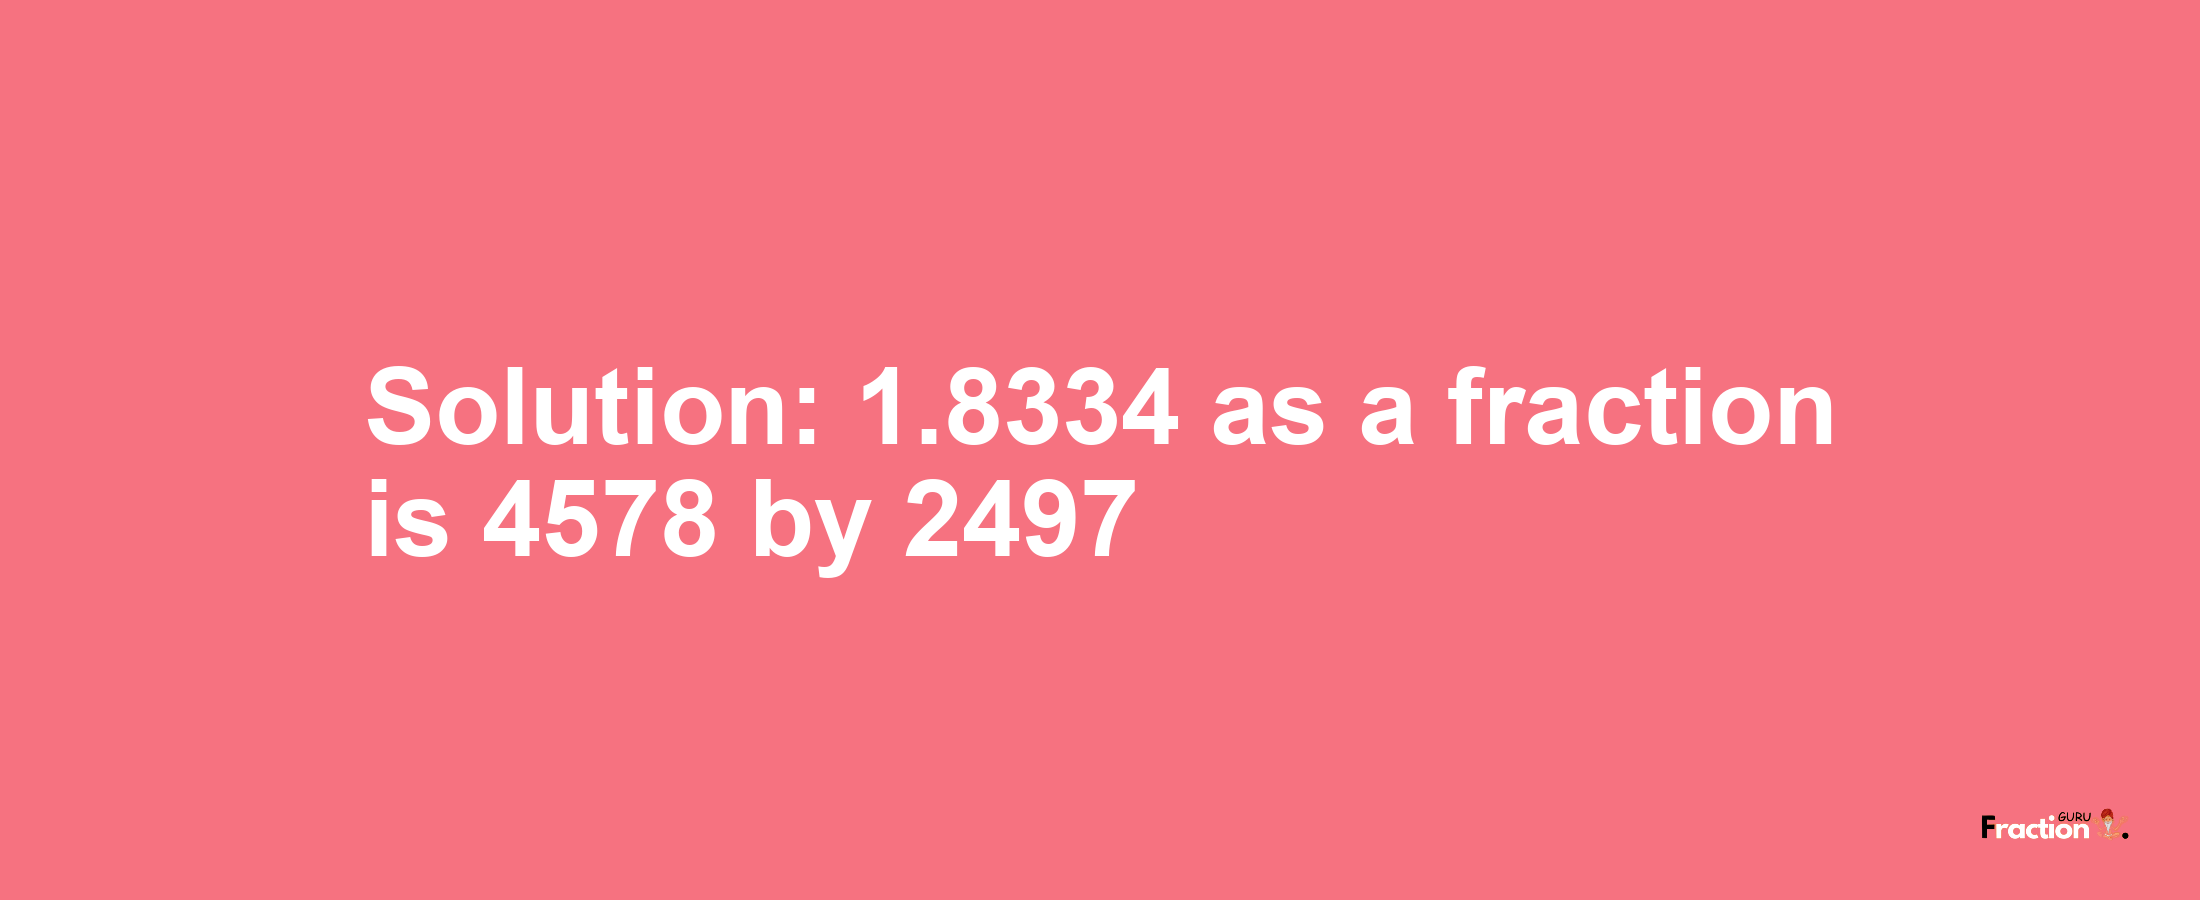 Solution:1.8334 as a fraction is 4578/2497